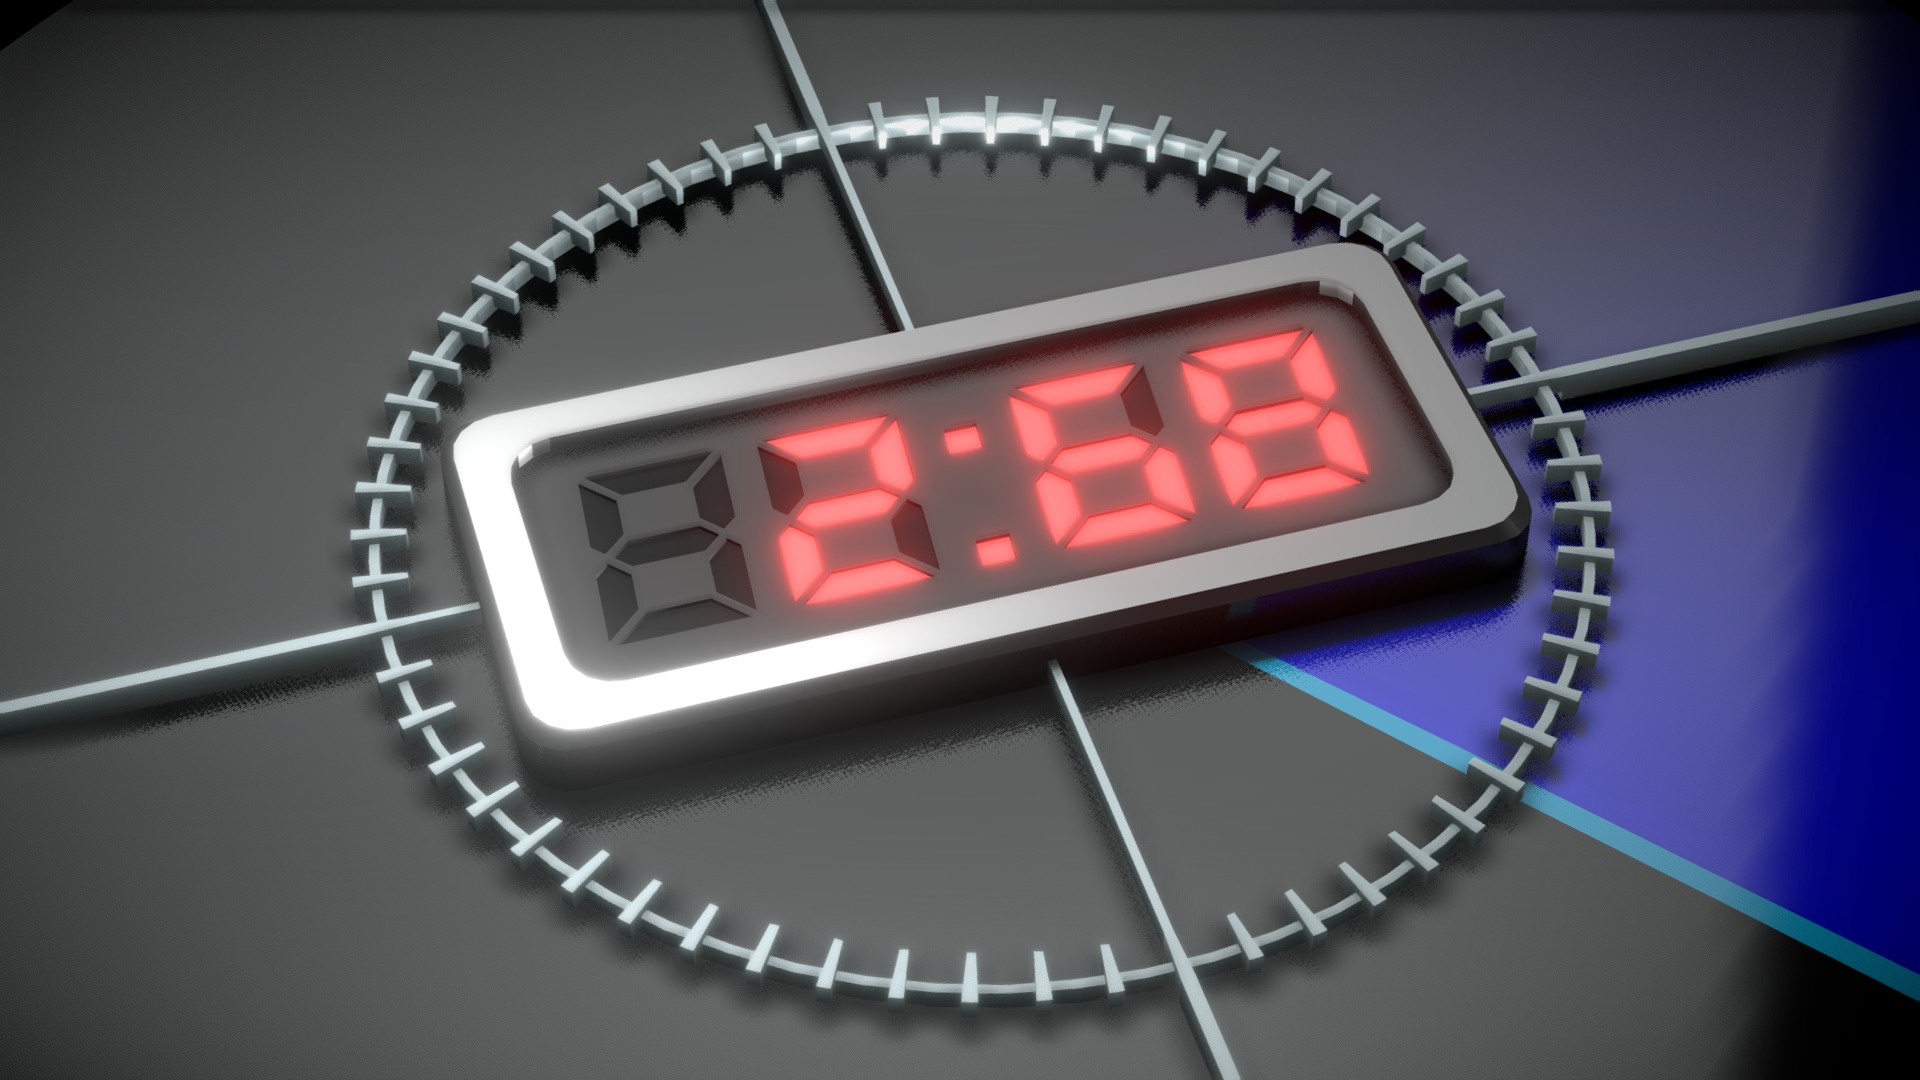 3D model Video Countdown 5 4 3 2 1 - This is a 3D model of the Video Countdown 5 4 3 2 1. The 3D model is about a digital clock with a red light.